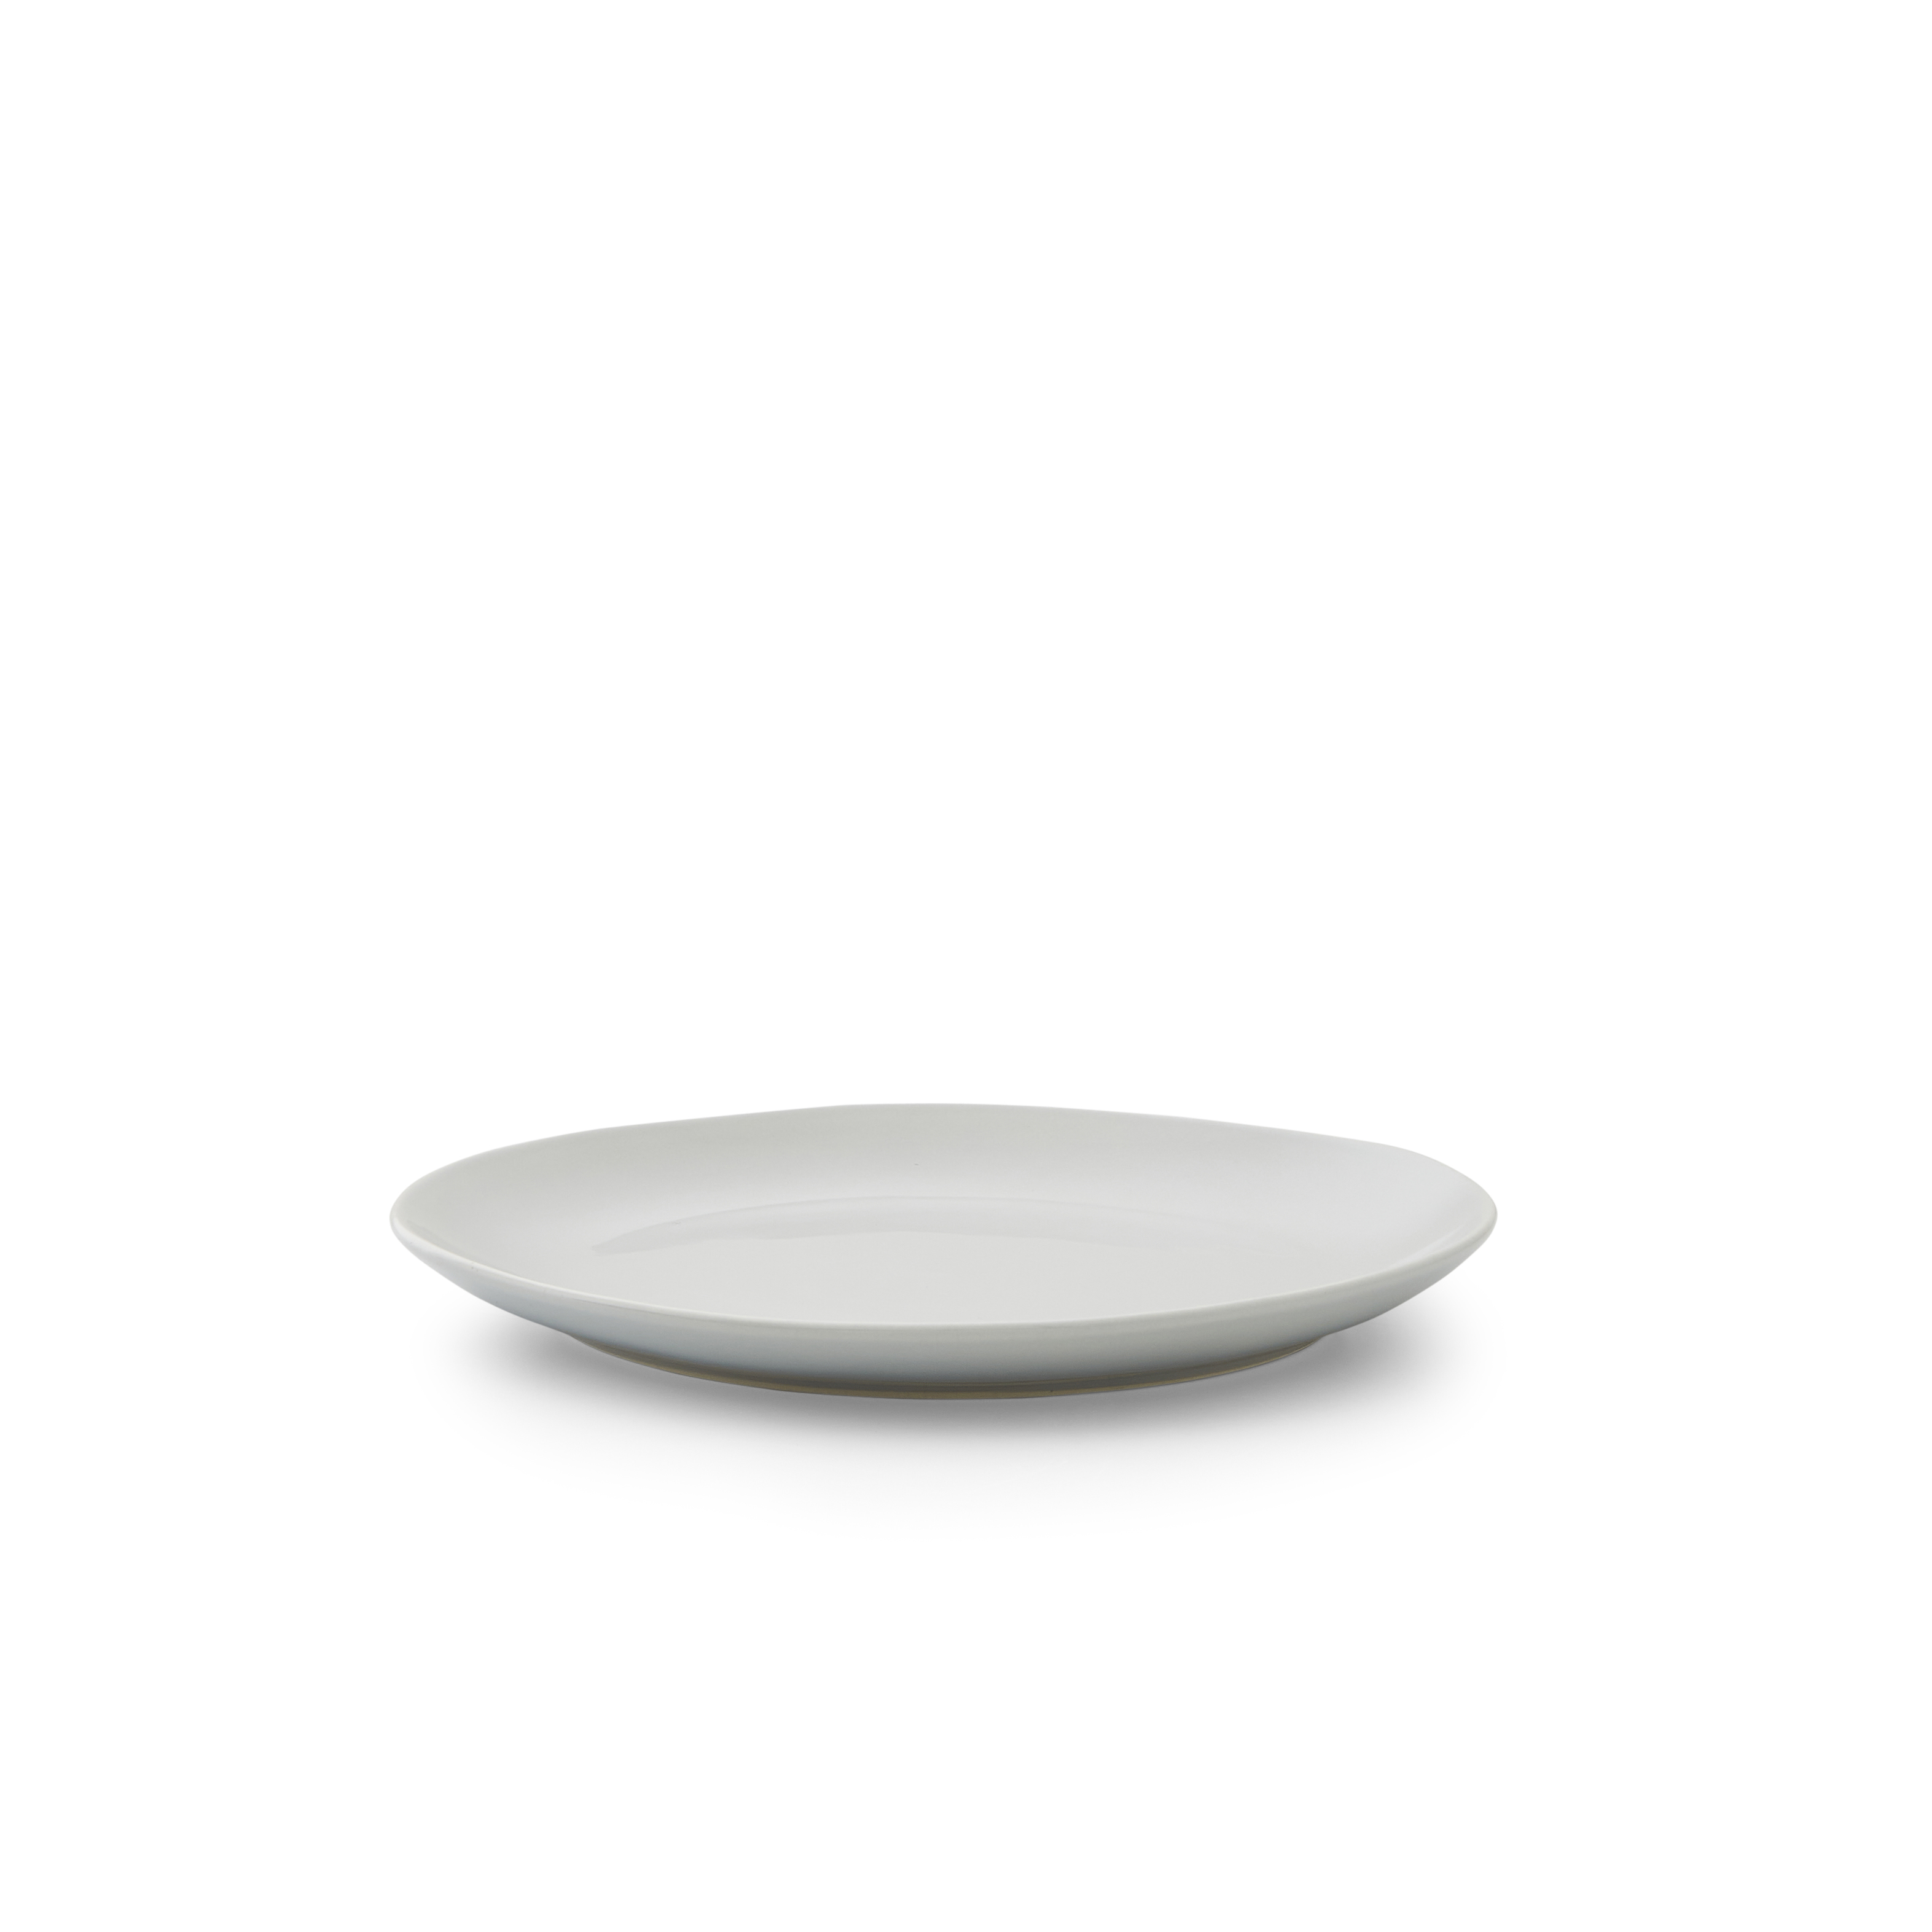 Sophie Conran Arbor 8.5" Salad Plate- Dove Grey image number null